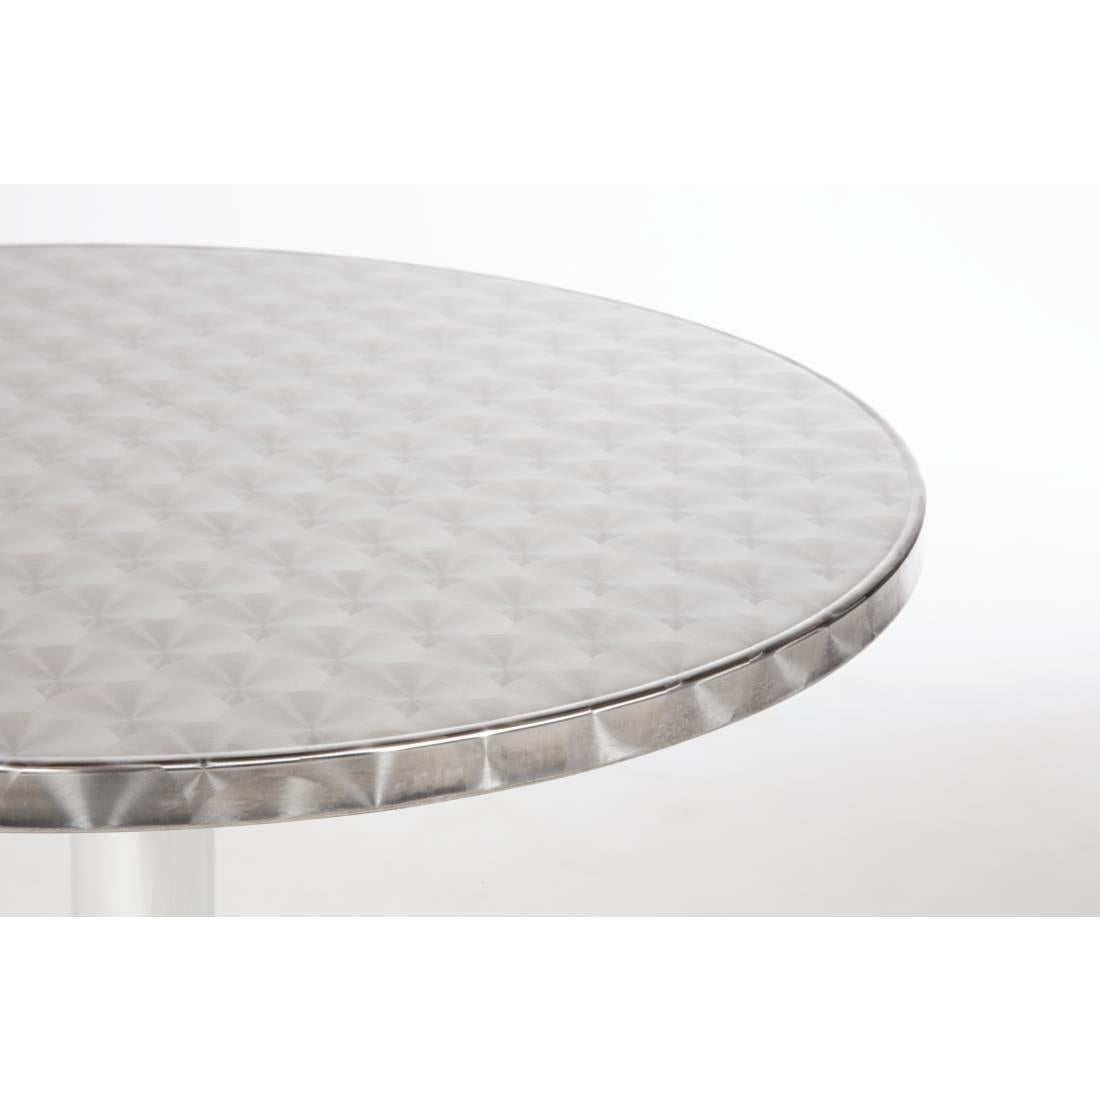 Bolero Round Bistro Table Stainless Steel JD Catering Equipment Solutions Ltd